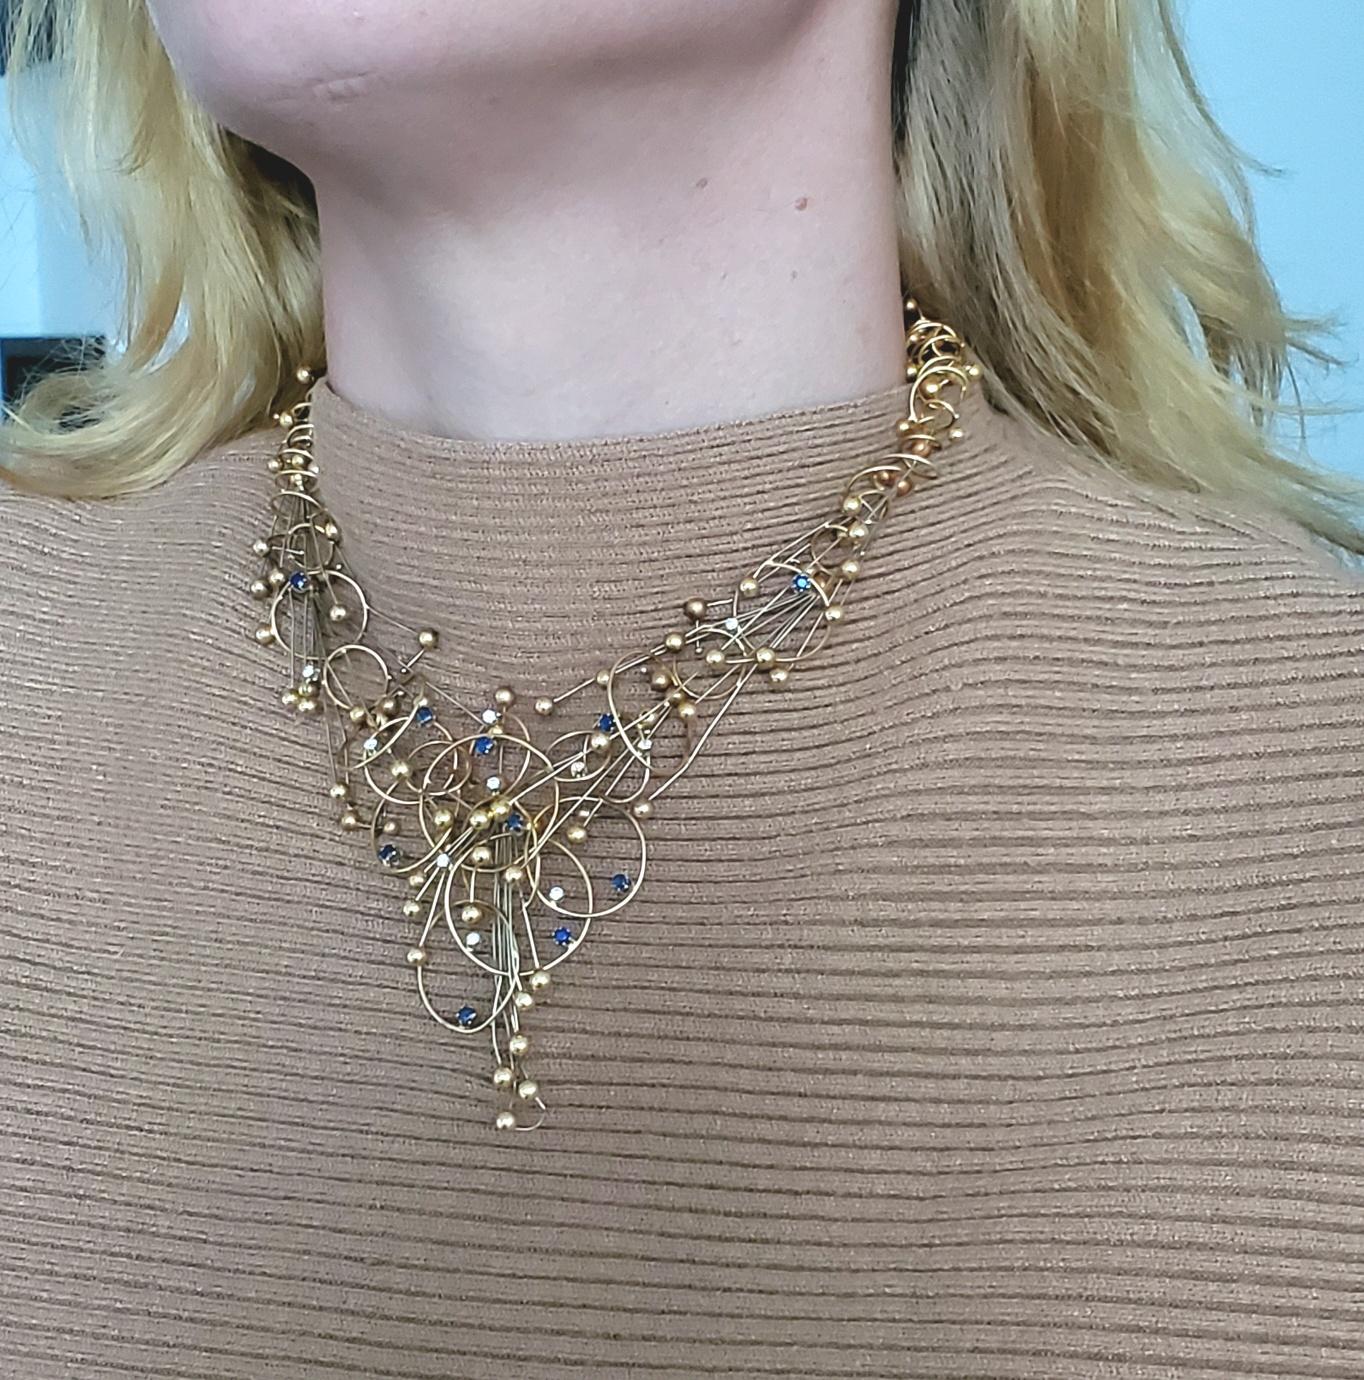 An sculptural geometric necklace.

Fabulous sculptural necklace created in north Europe, back in the 1970. This unusual highly sculpted necklace was carefully assembled with multiples wires and spheres crafted from yellow and white gold of 18 karats